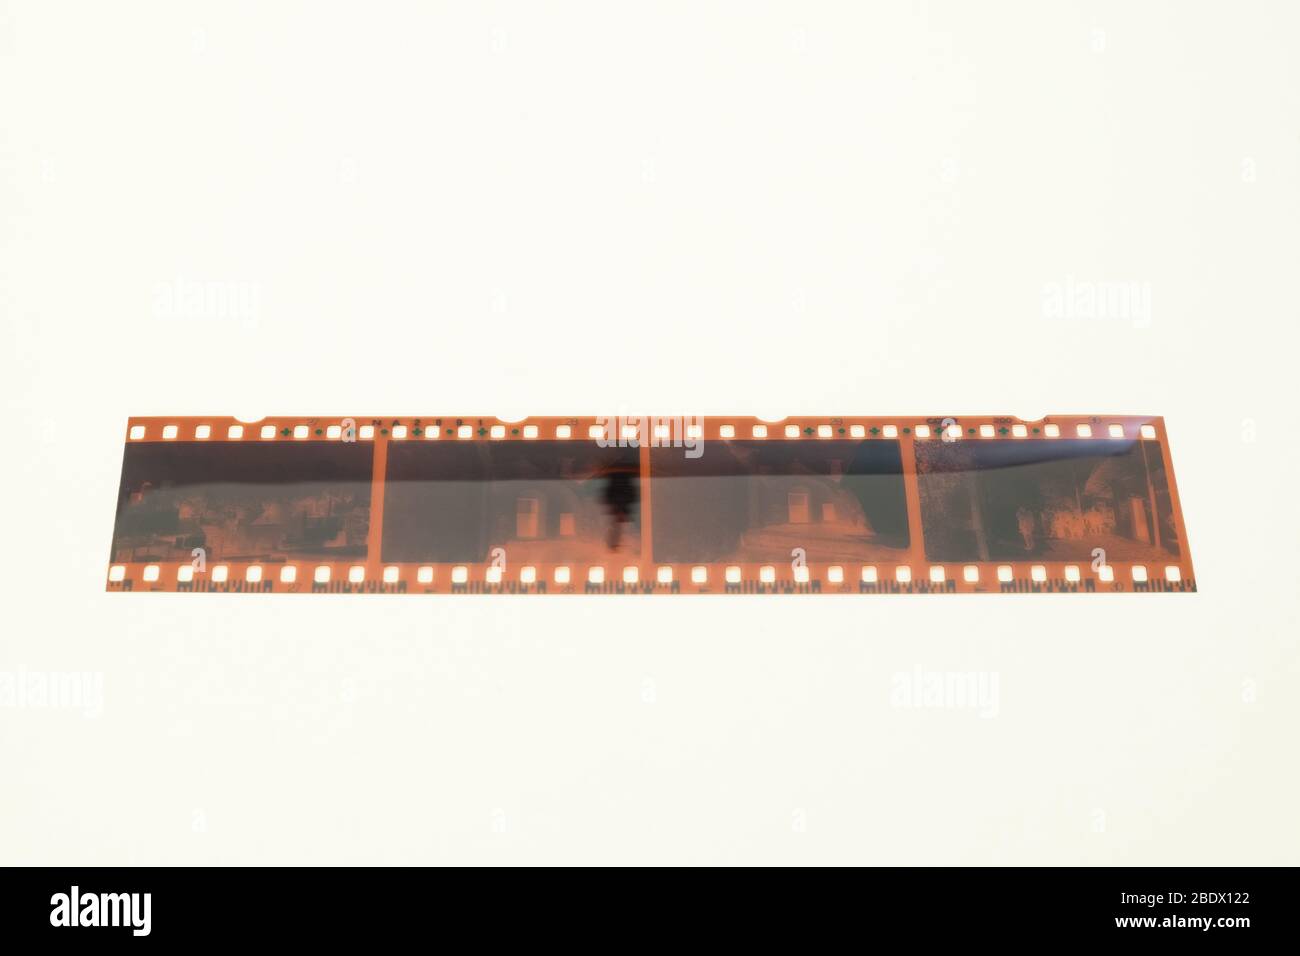 A 4-frame analogue negative strip is photographed above a white background. Stock Photo